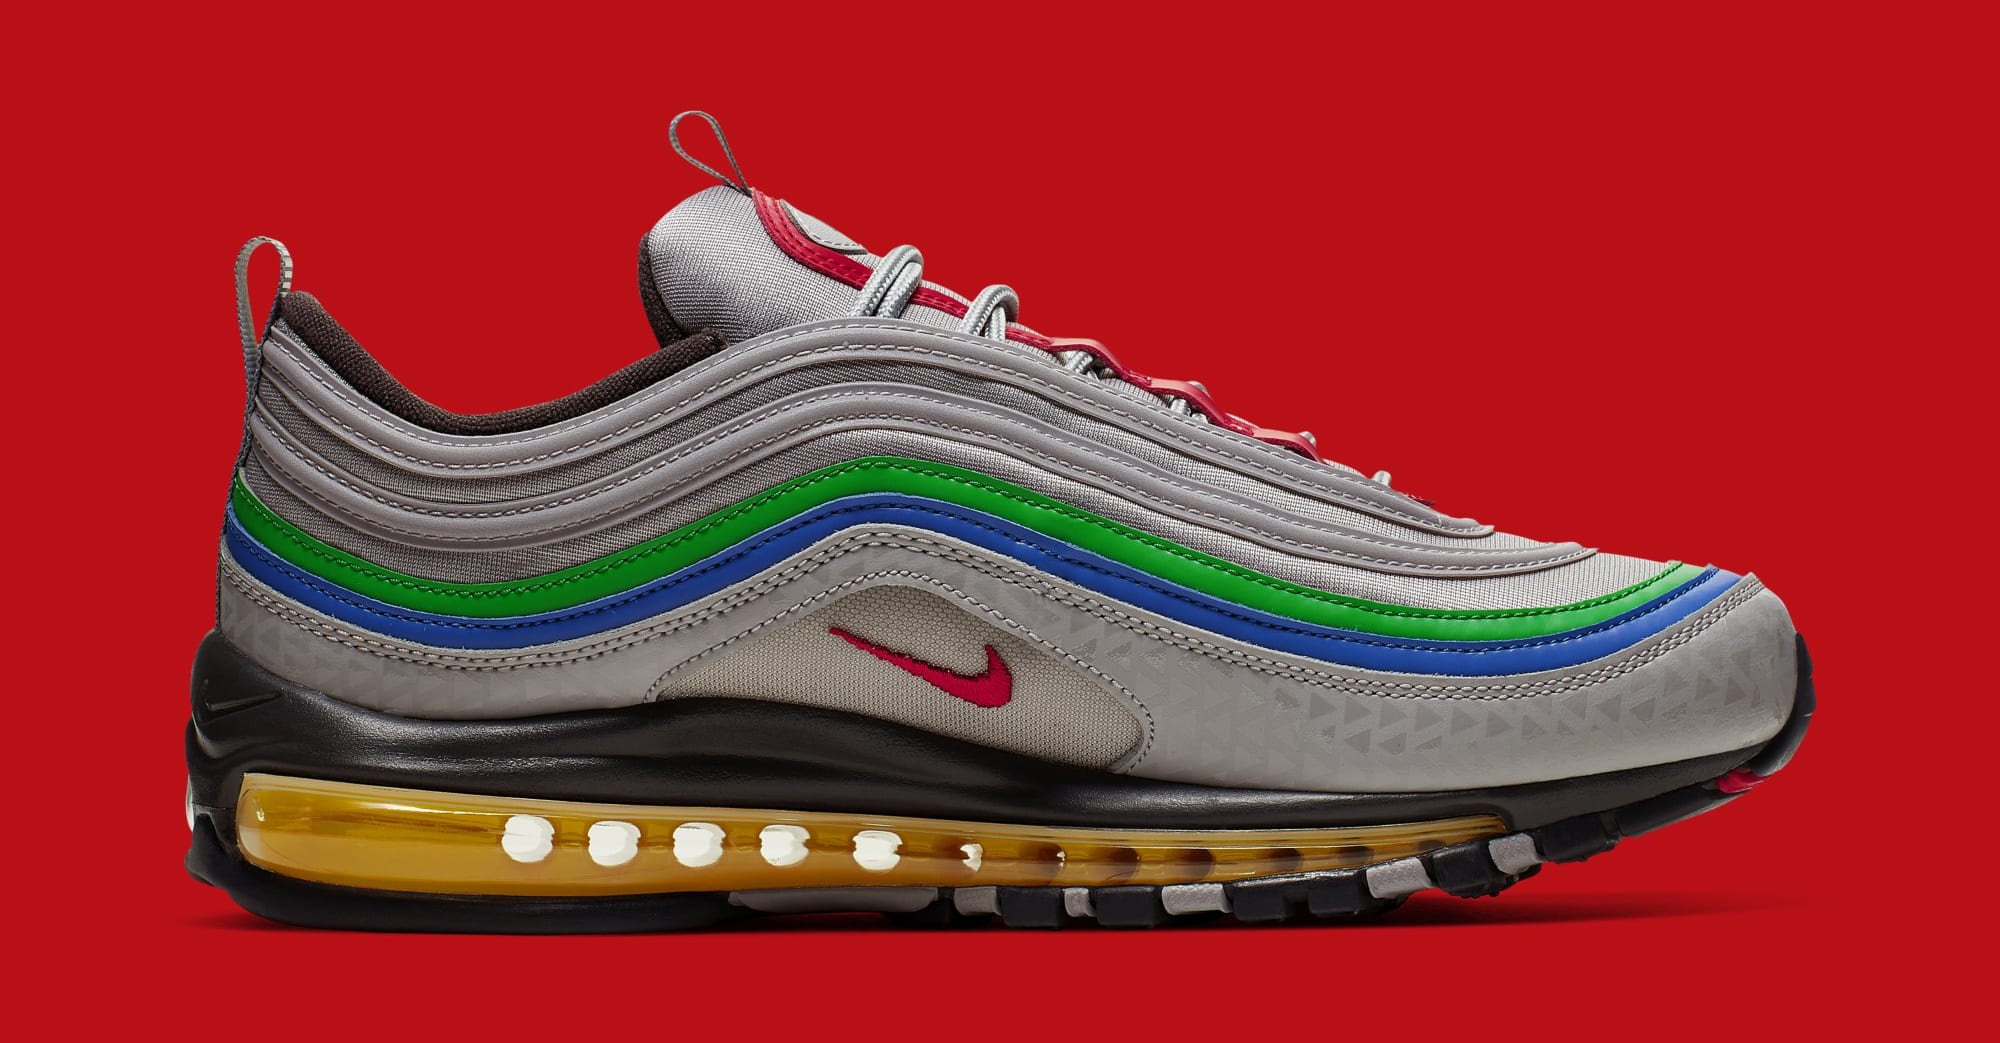 Nike Air Max 97 &quot;Nintendo 64&quot; Revealed On National Video Game Day